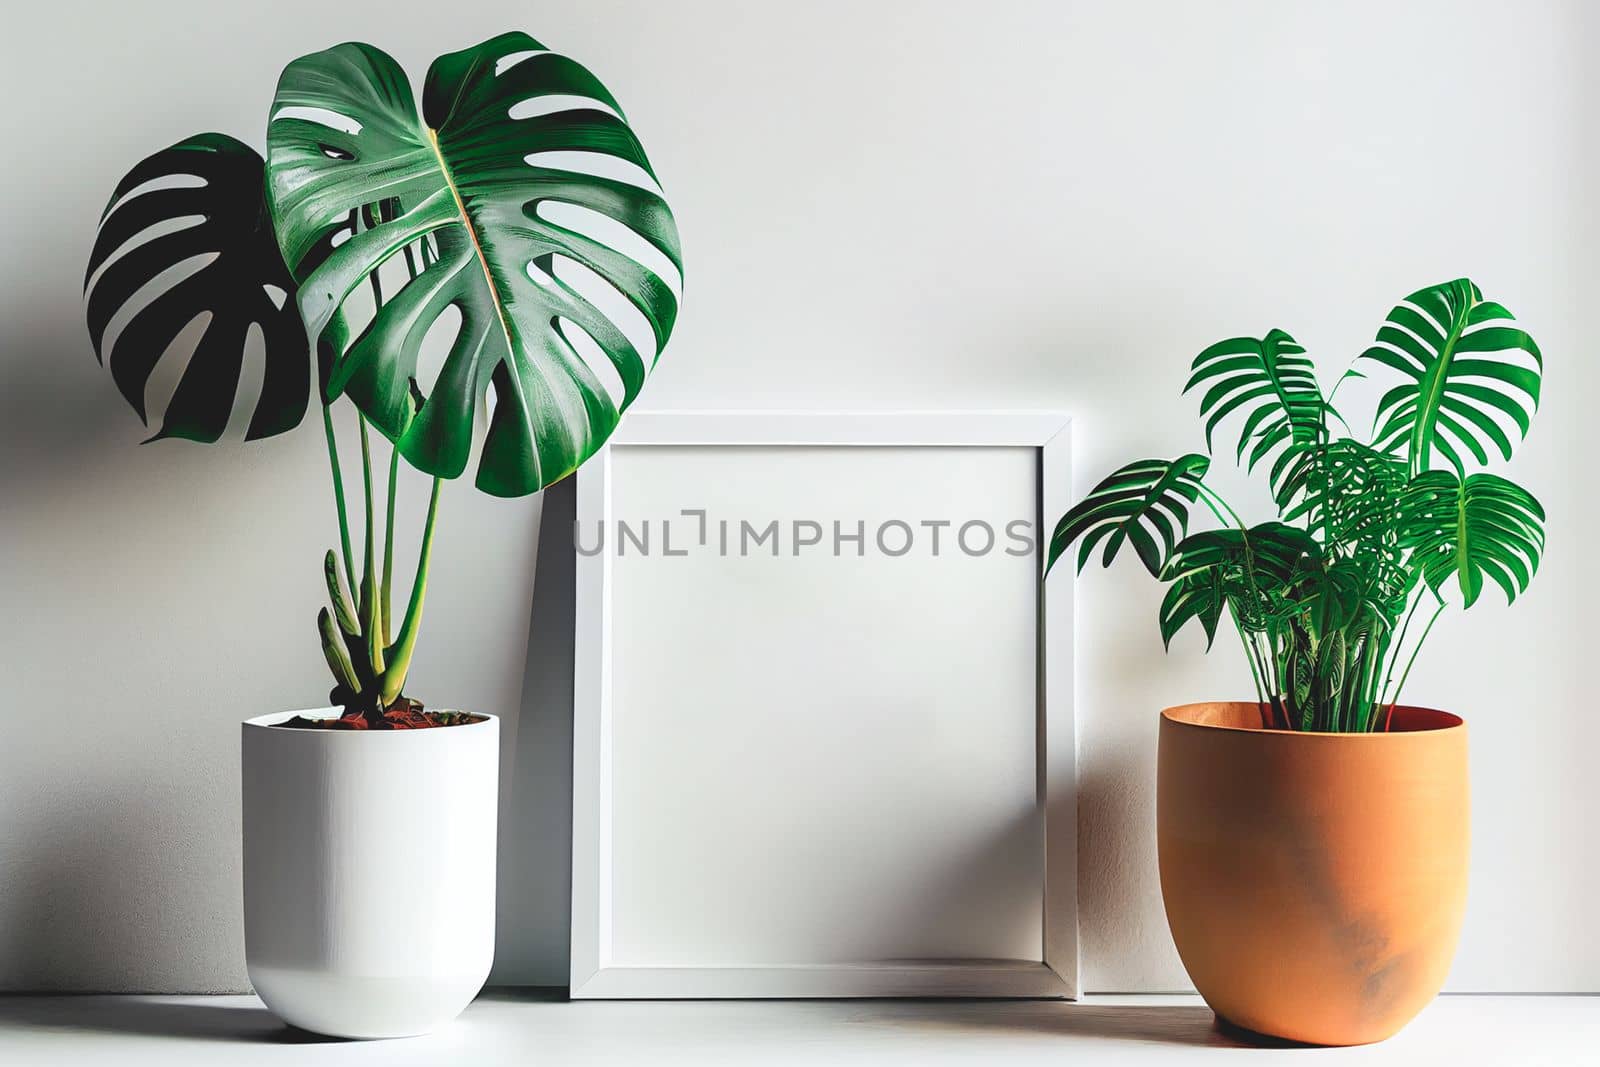 Mockup of empty frame displayed inside room interior with white wall background and monstera plant pot nearby by FokasuArt